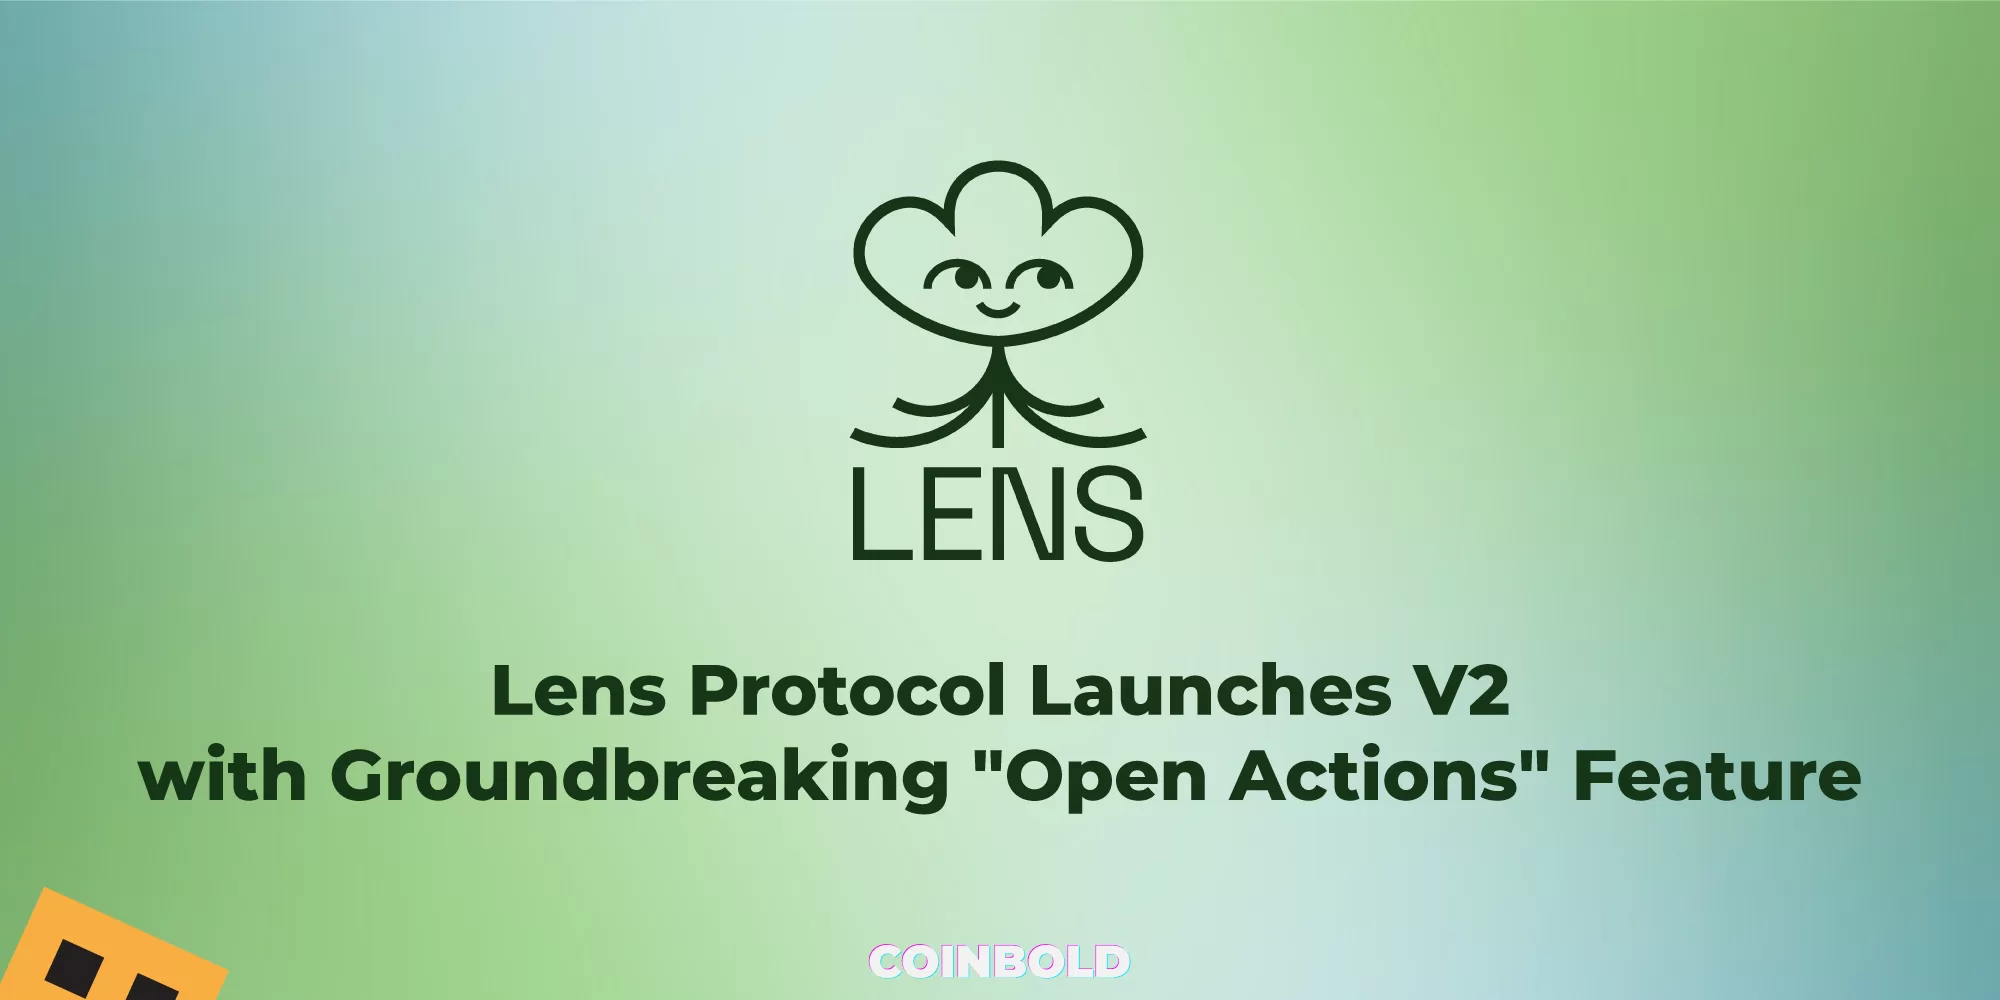 Lens Protocol Launches V2 with Groundbreaking "Open Actions" Feature